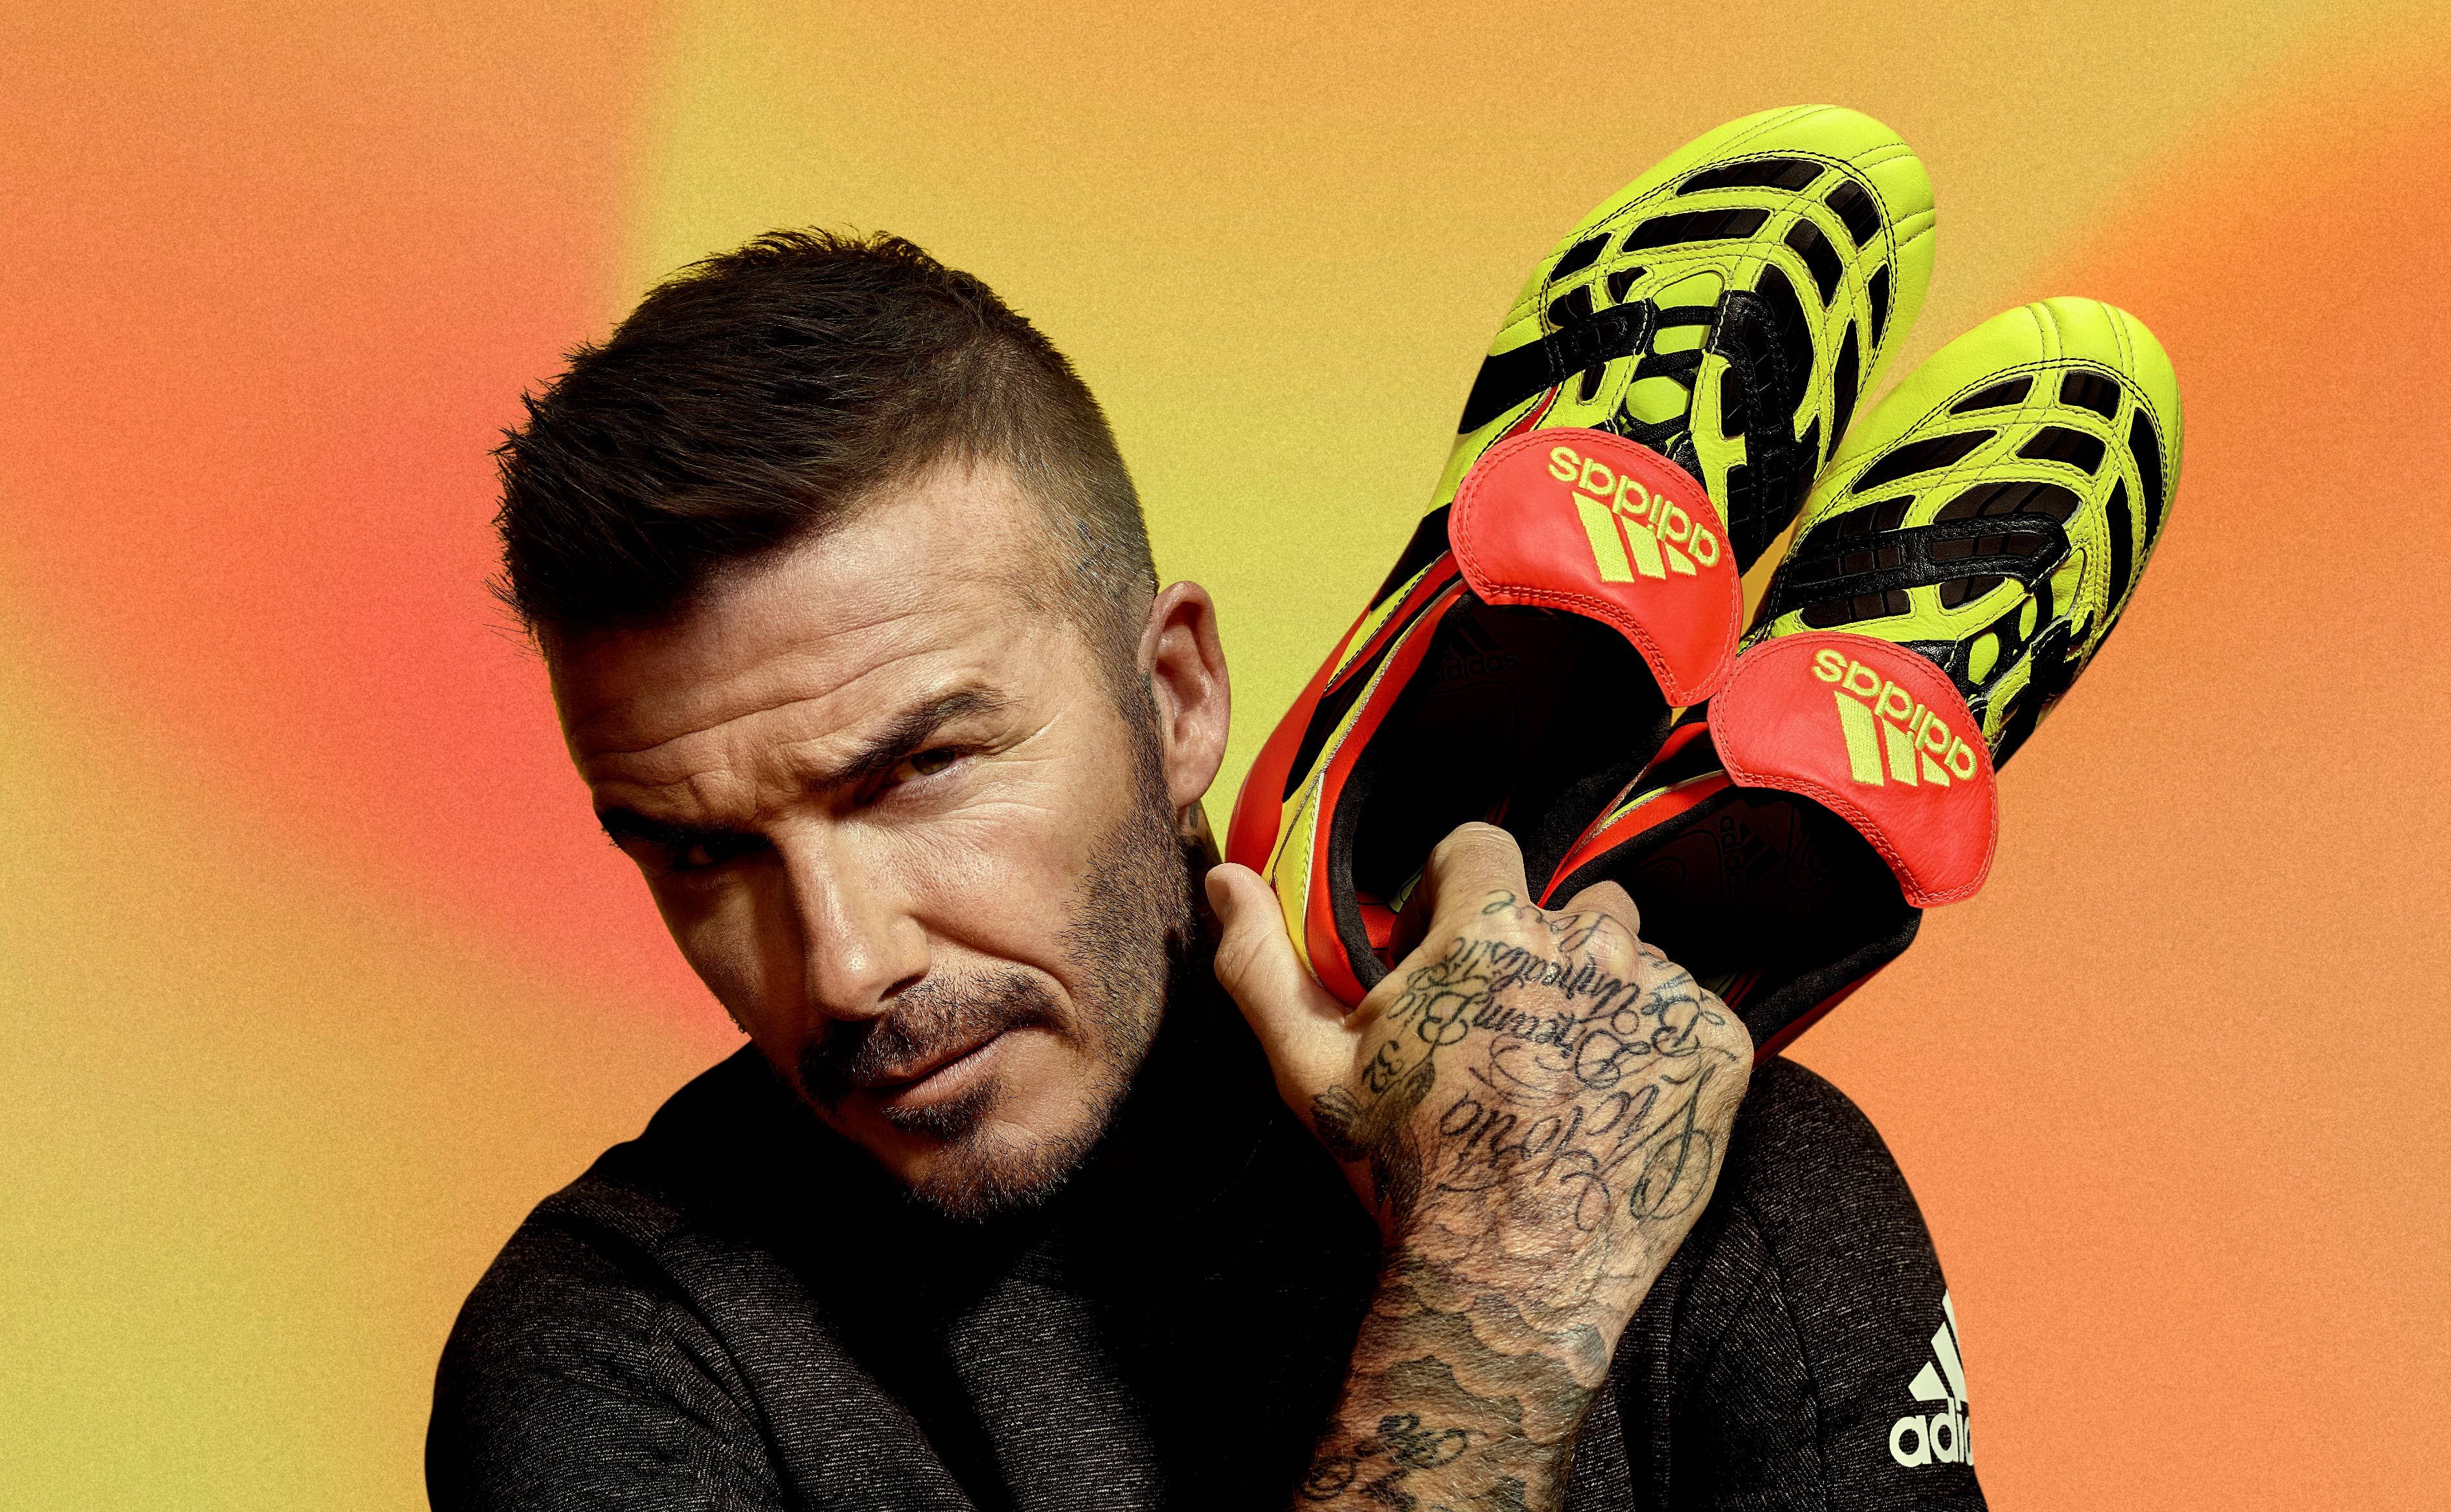 Let David Beckham Teach You How To Wear The Same Pair Of Boots